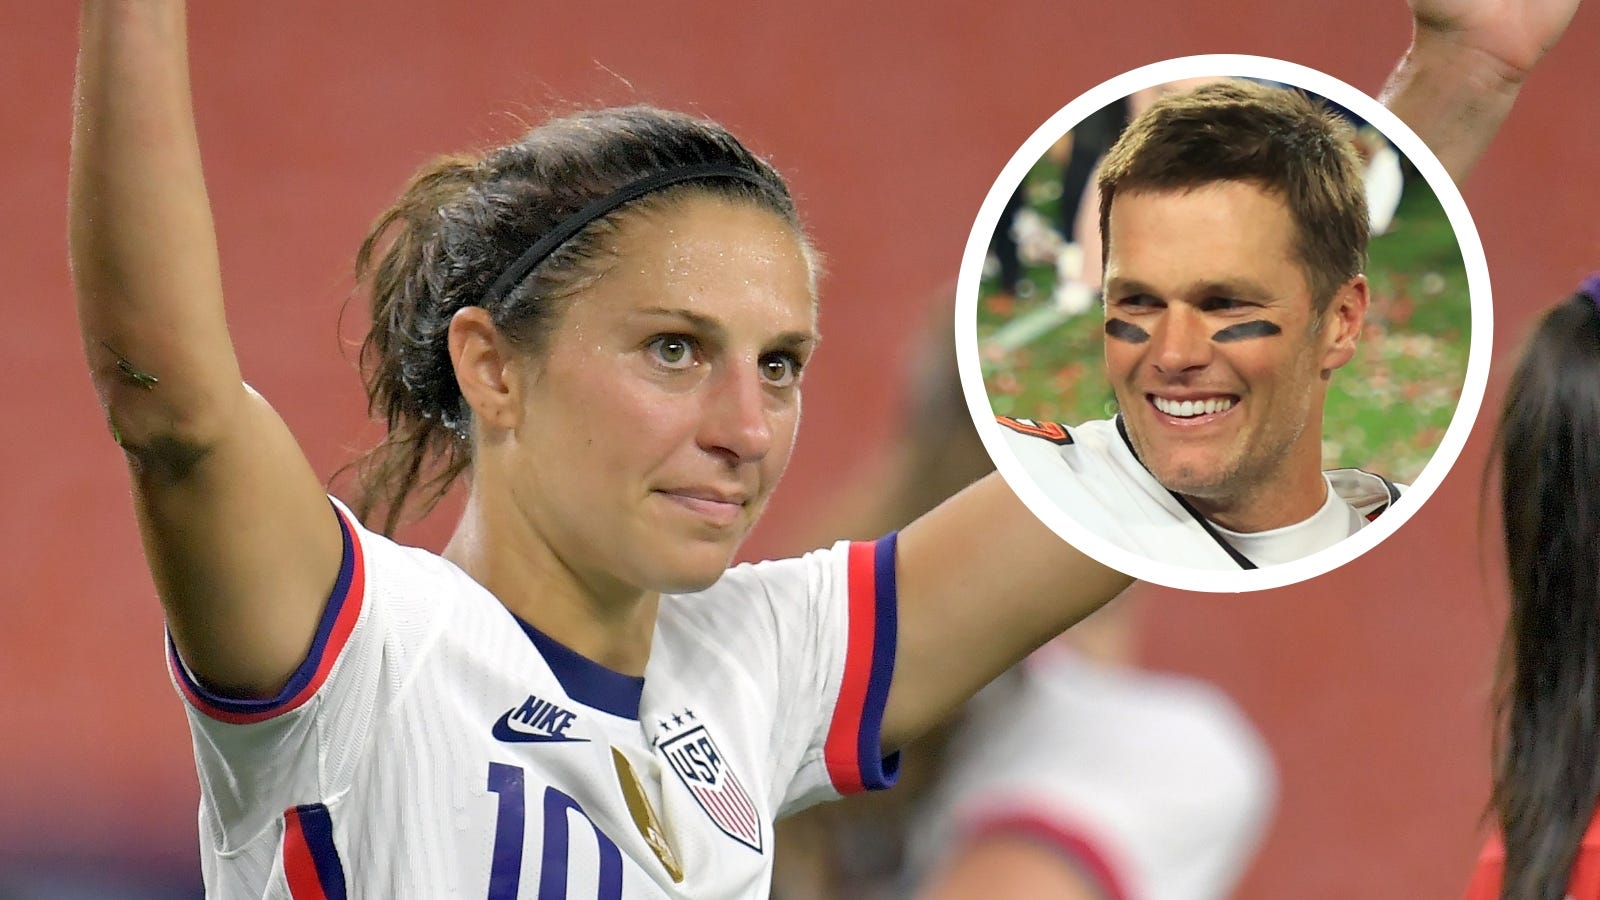 Tom Brady doesn't have to have kids!' - USWNT icon Lloyd opens up on decision to retire and media criticism | Goal.com South Africa